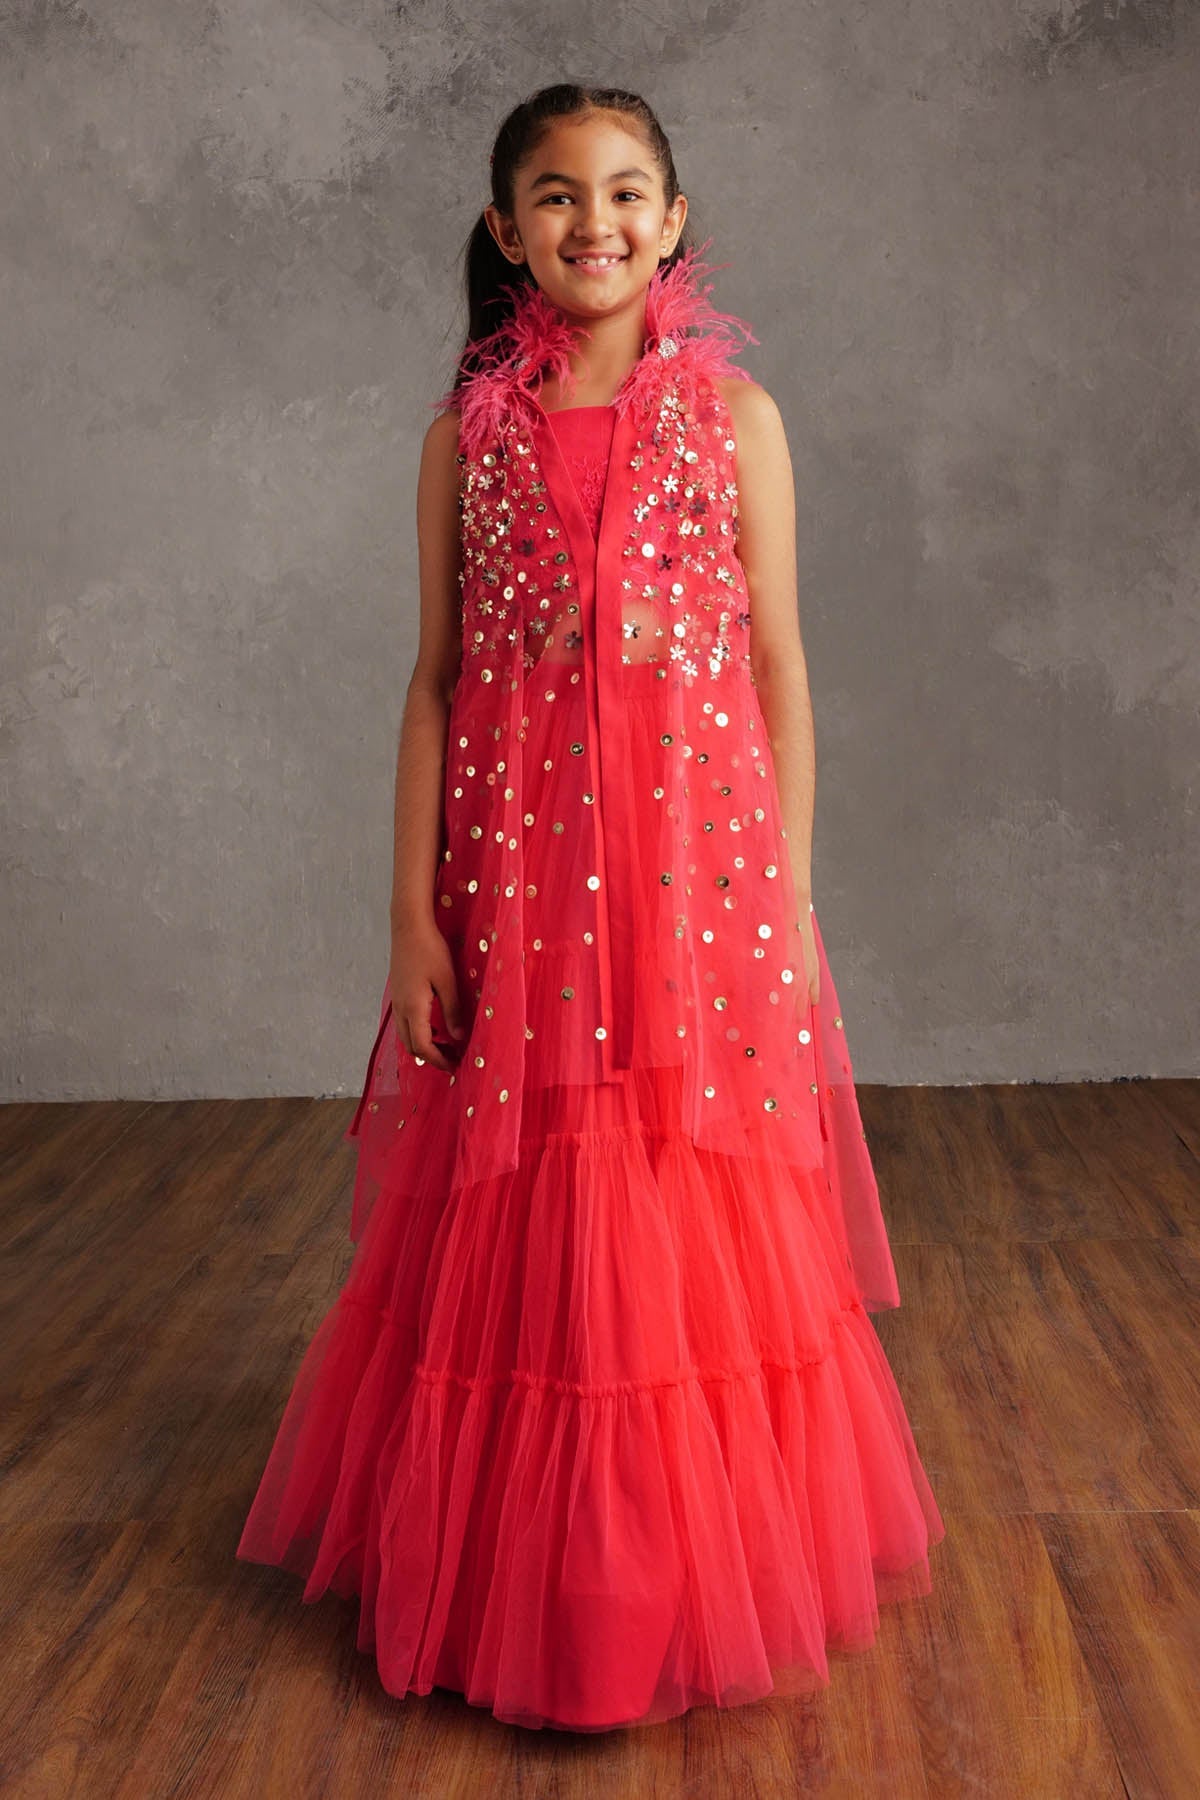 By Not So Serious By Pallavi Mohan Applique Work Lehenga Set For Girls Available online at ScrollnShops